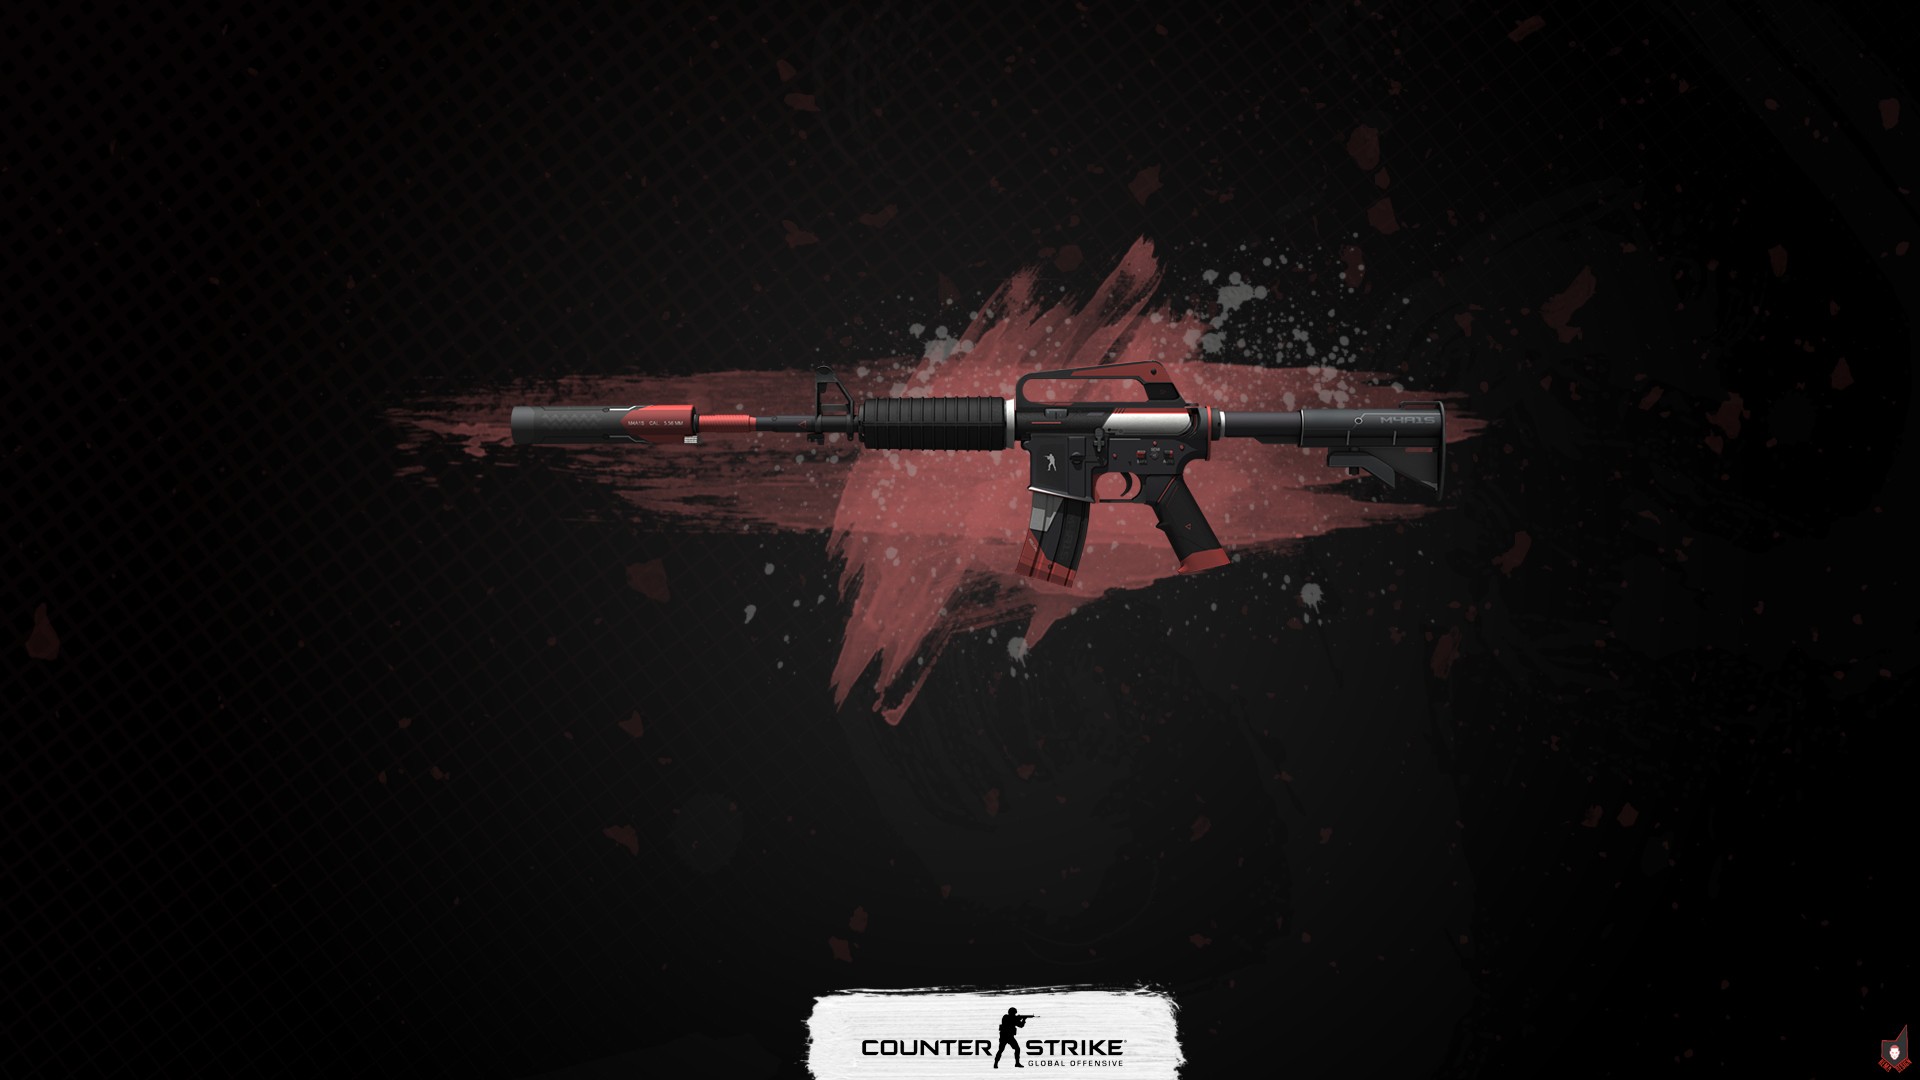 General 1920x1080 Counter-Strike Counter-Strike: Global Offensive M4A1-S assault rifle PC gaming weapon